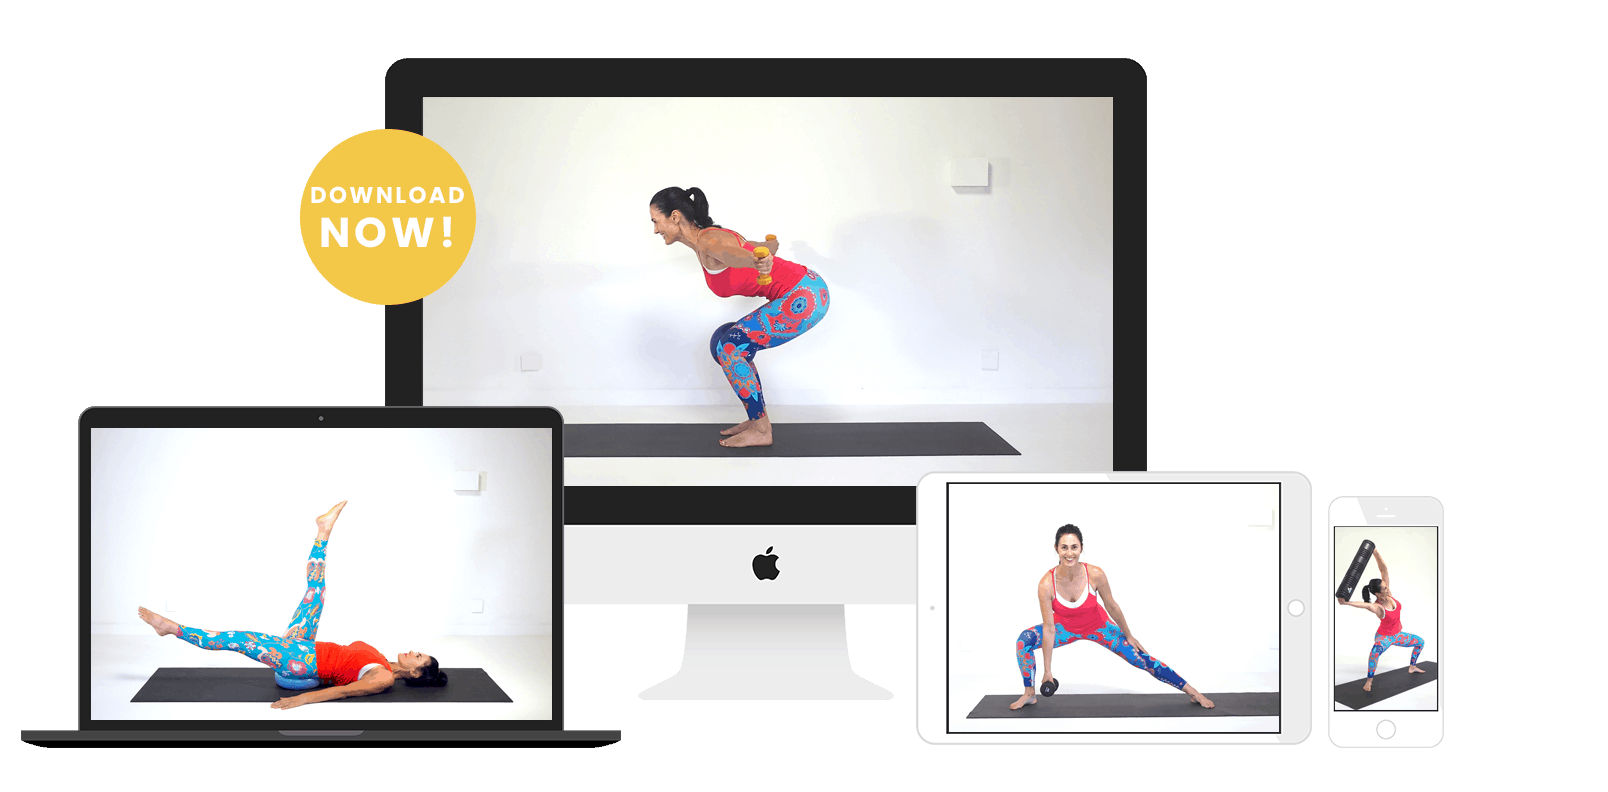 Get Fit and Toned over 50 with fast home workouts